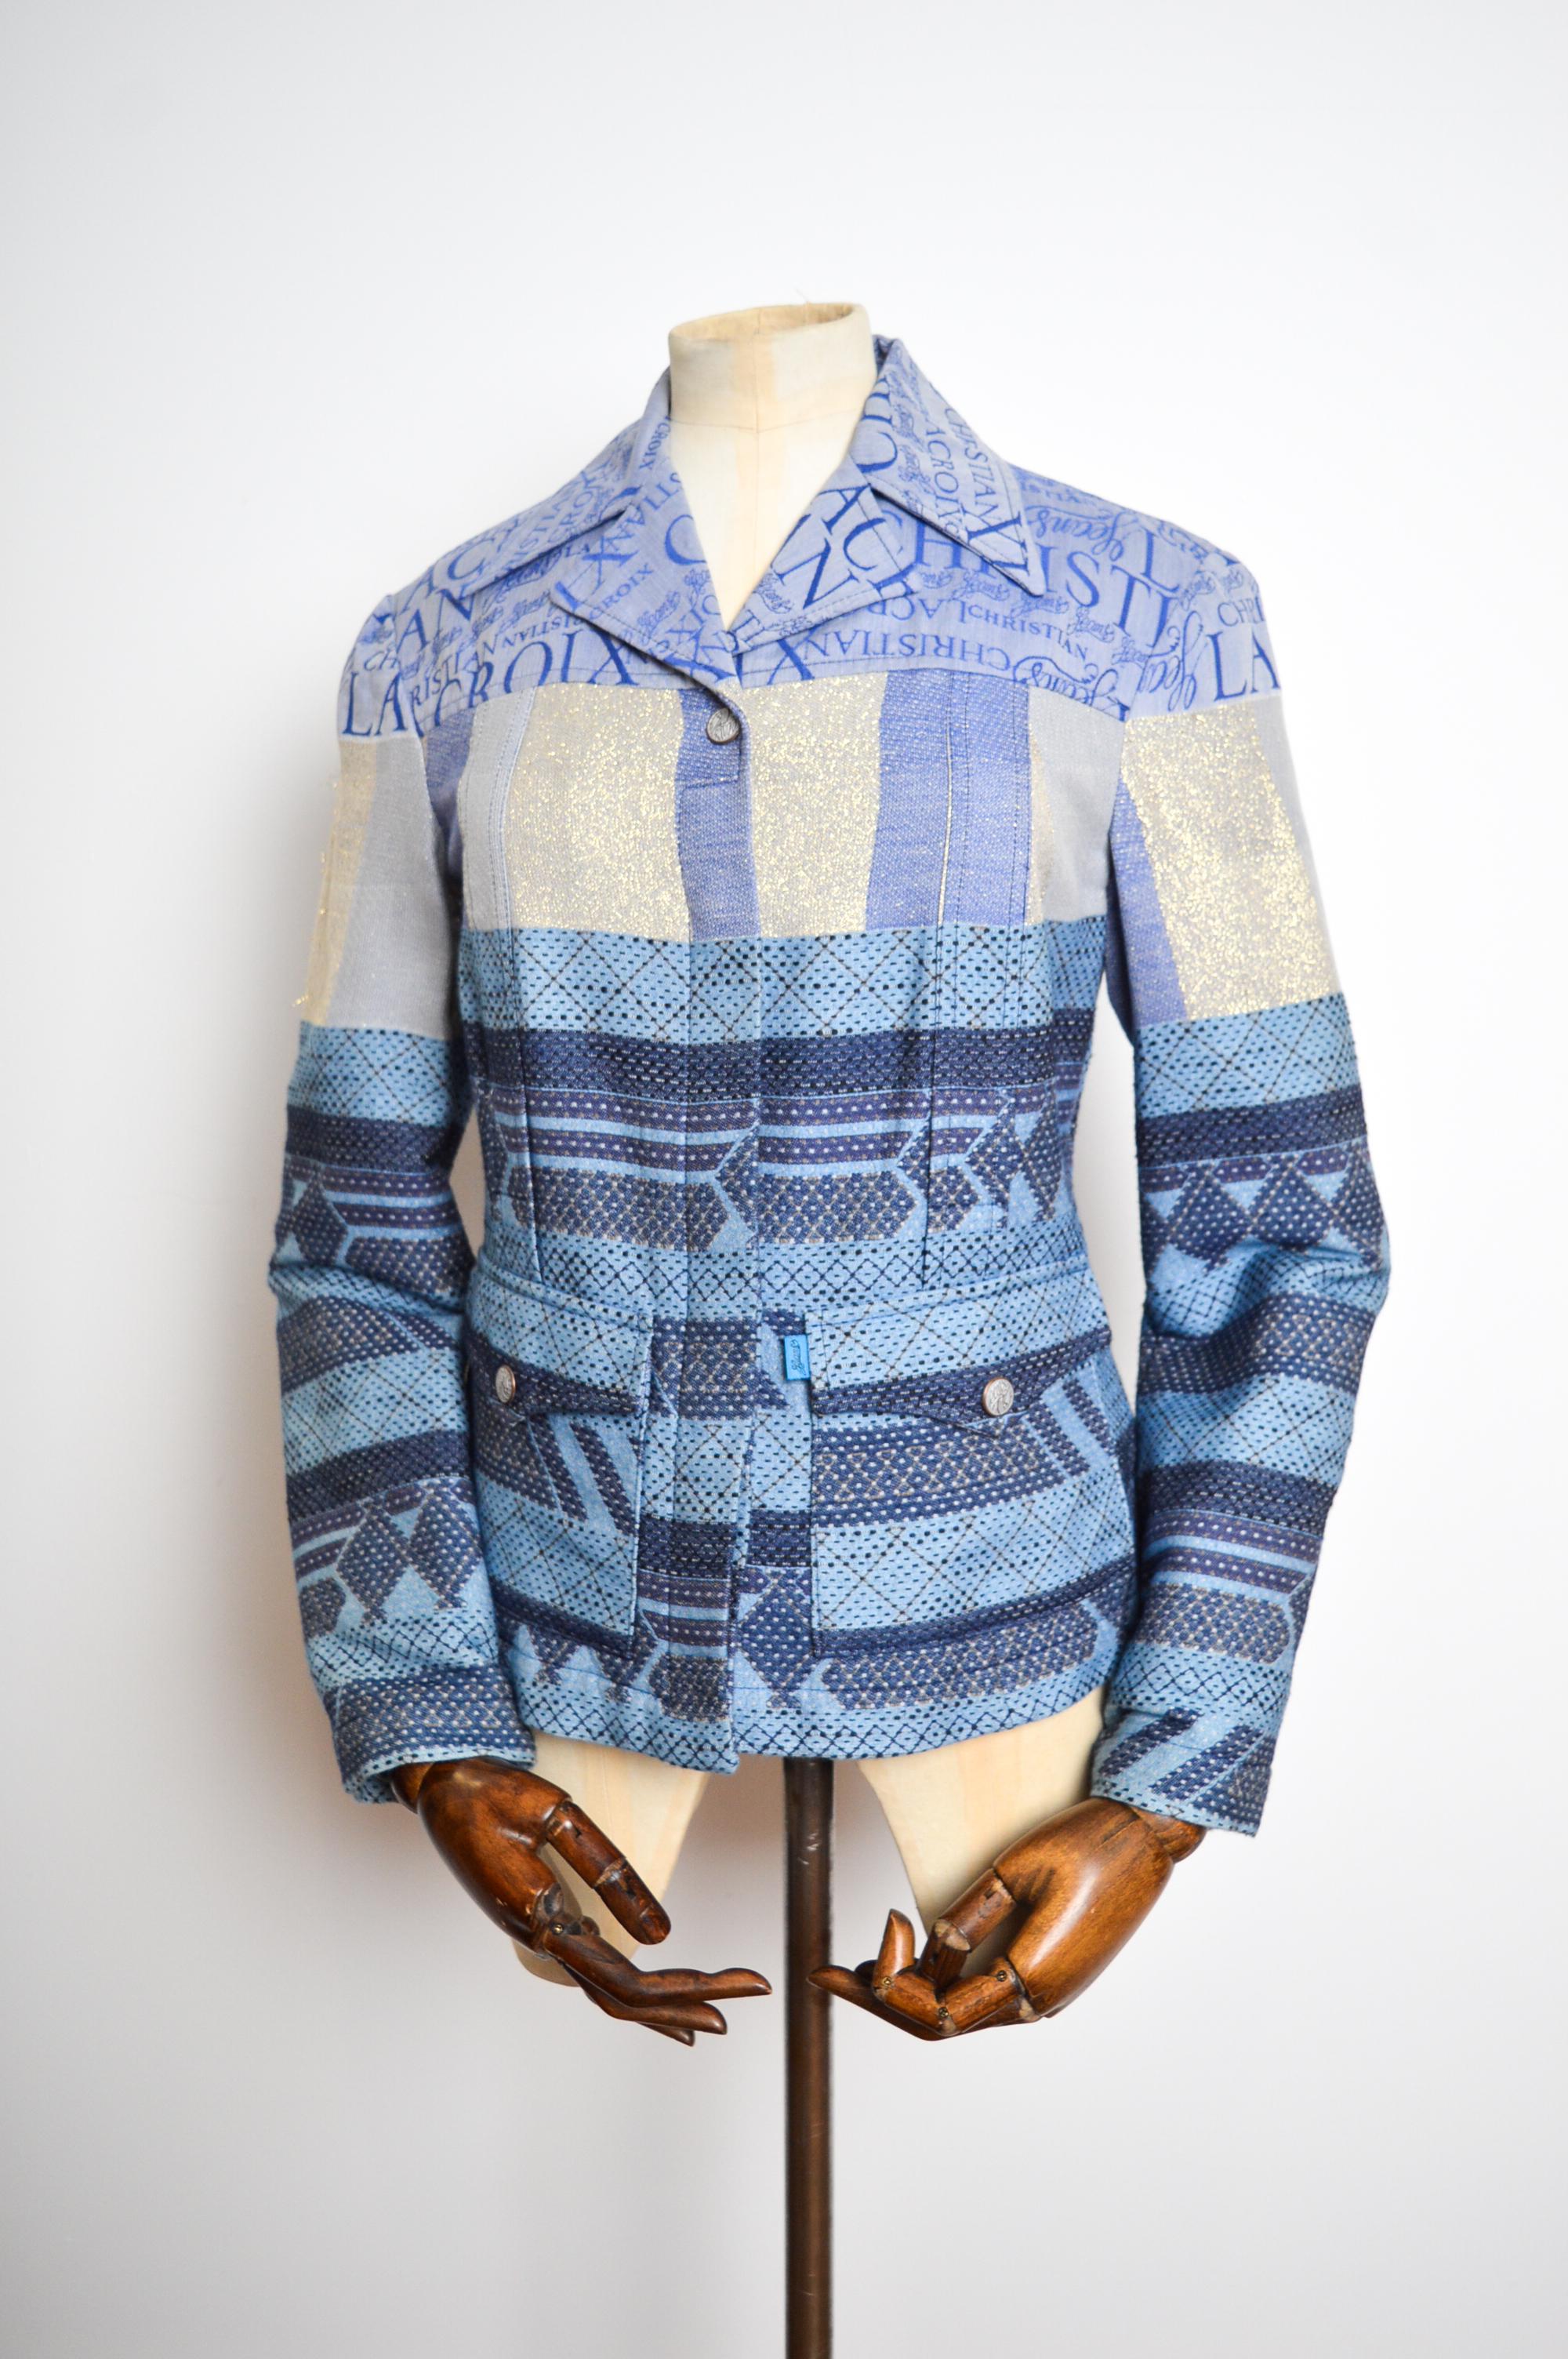 1990's Vintage Jacquard Monogram Jacket by Christian Lacroix, in a beautiful intricately crafted blue jacquard cloth featuring a simple long sleeve, button down design. 

The Jacket has belt loops at the waist giving the wearer multiple styling